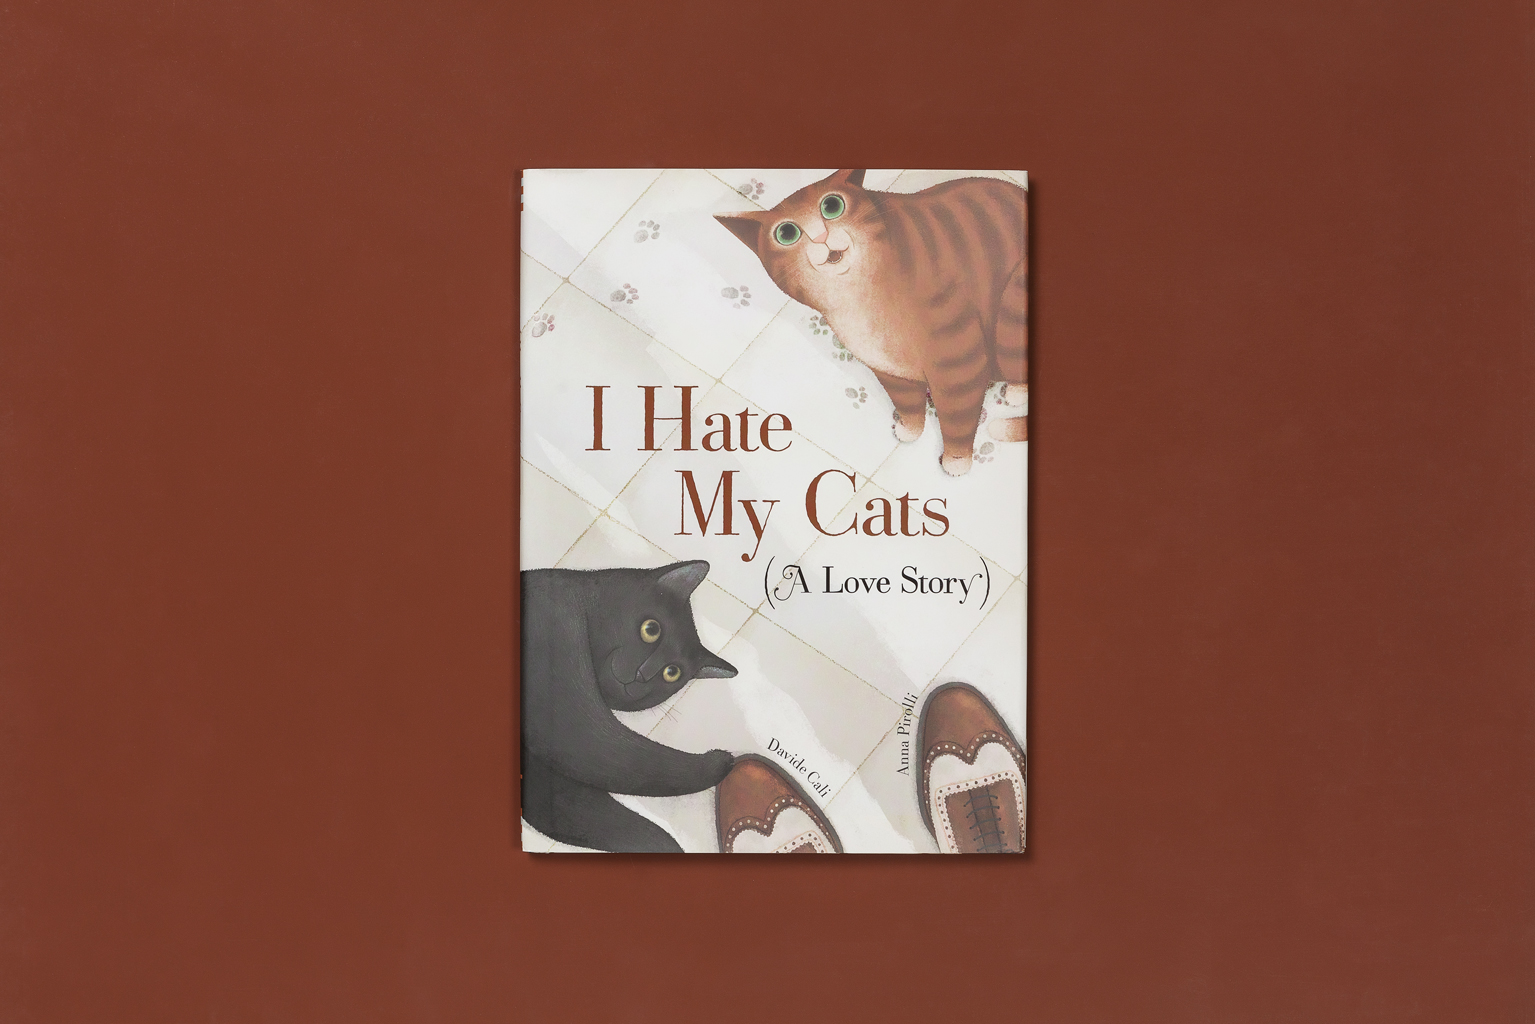 I-Hate-My-Cats-cover.jpg